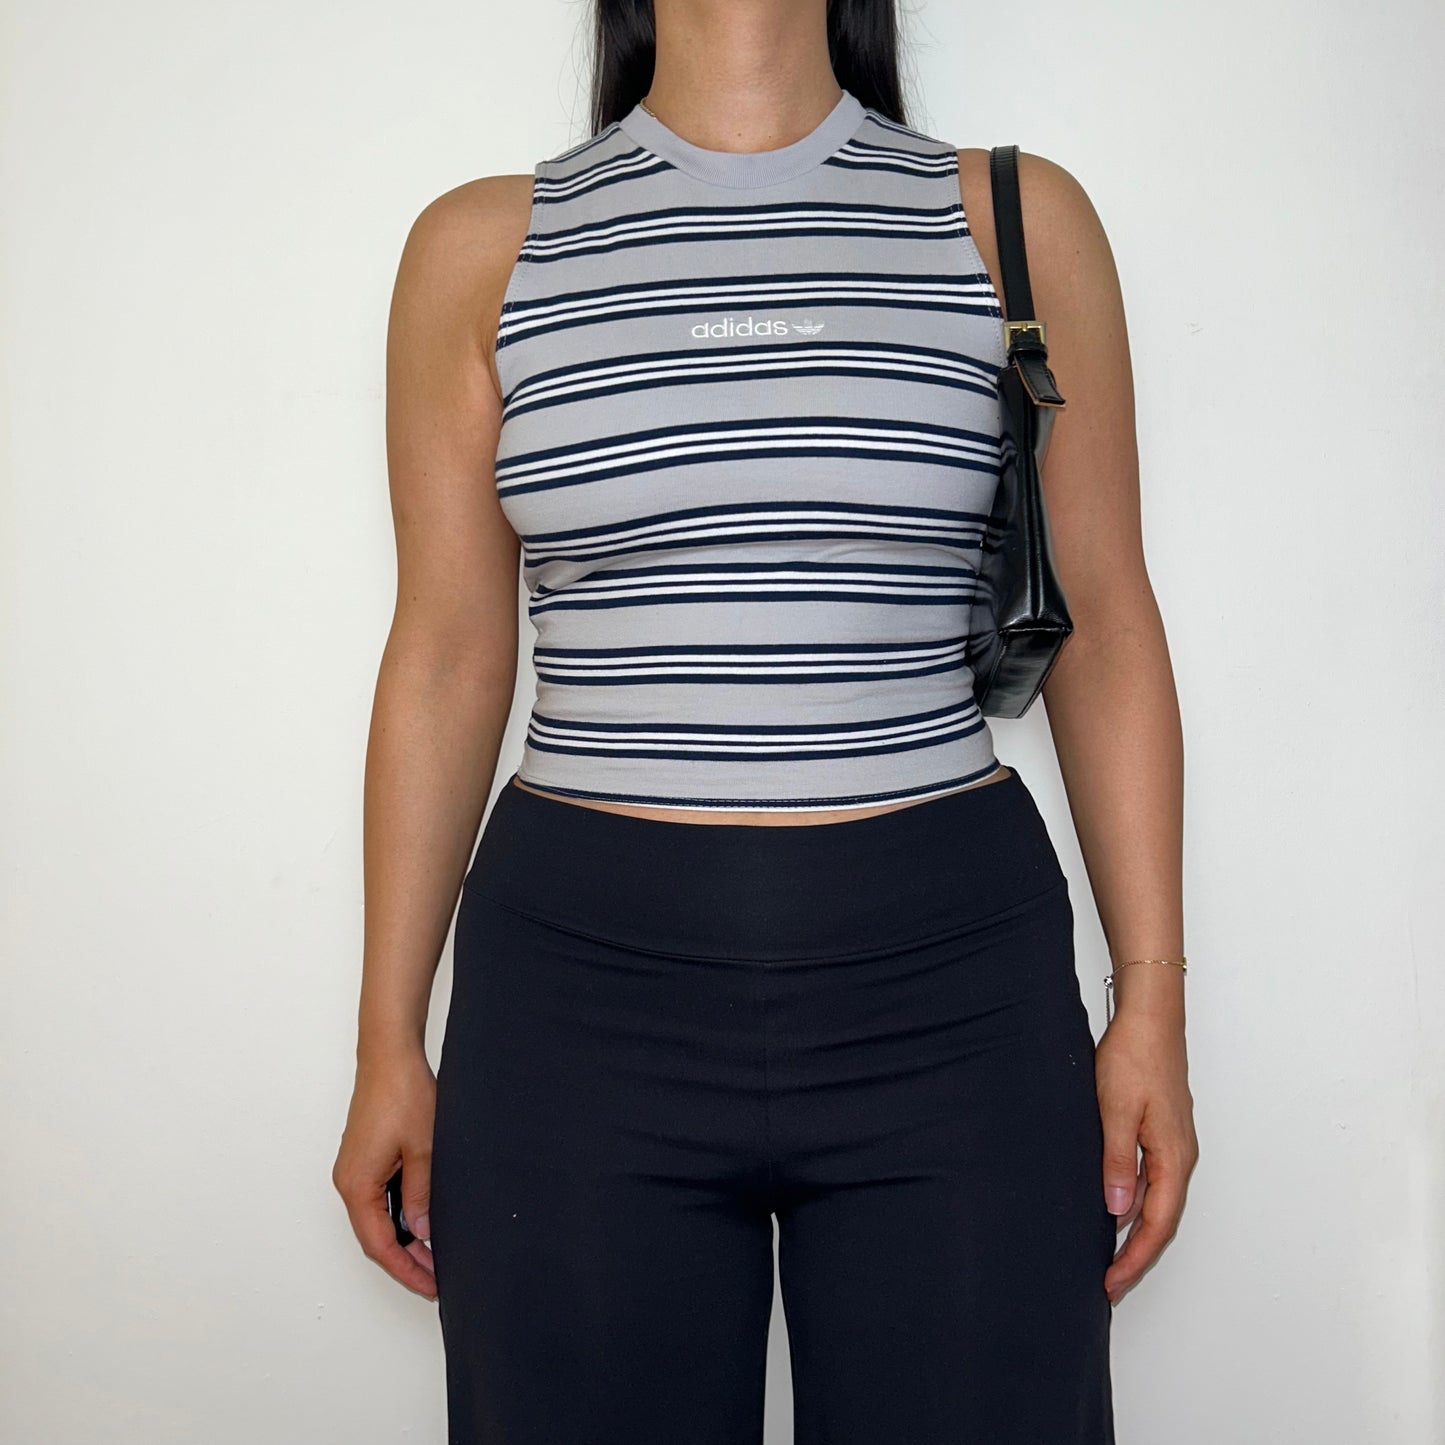 grey stripe sleeveless crop top with white adidas logo shown on a model wearing black trousers and a black shoulder bag